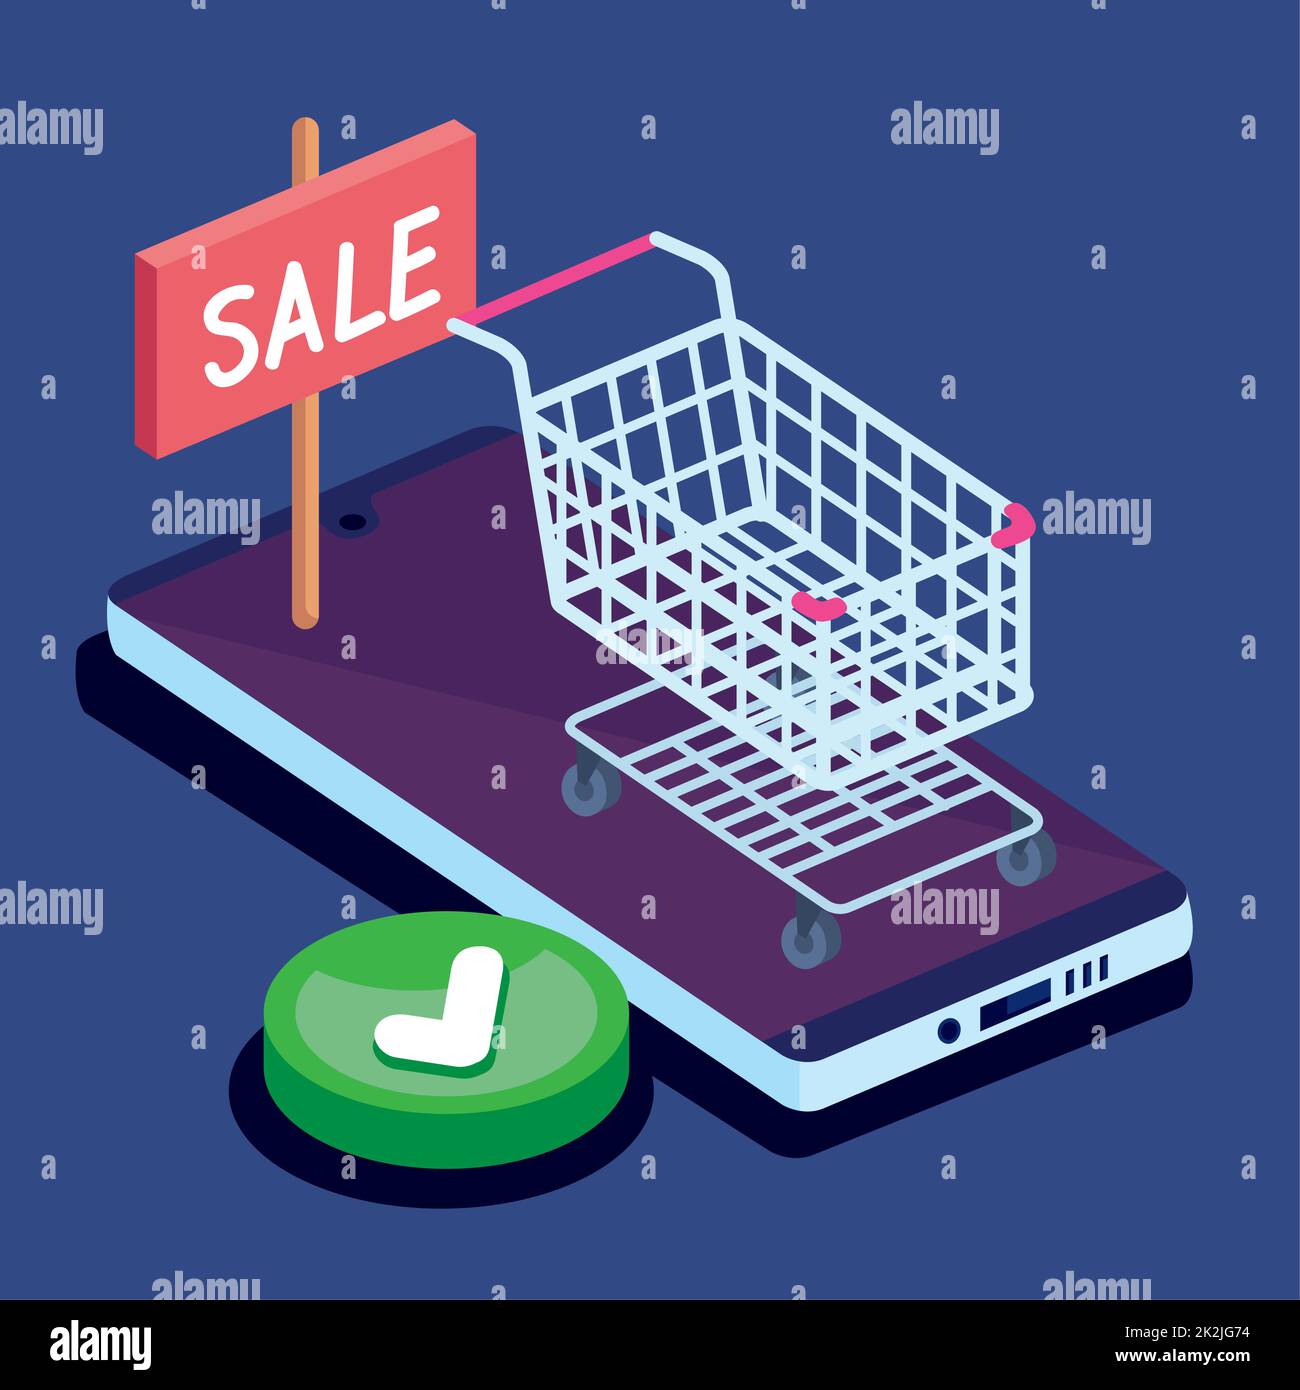 sale label in smartphone icons Stock Vector